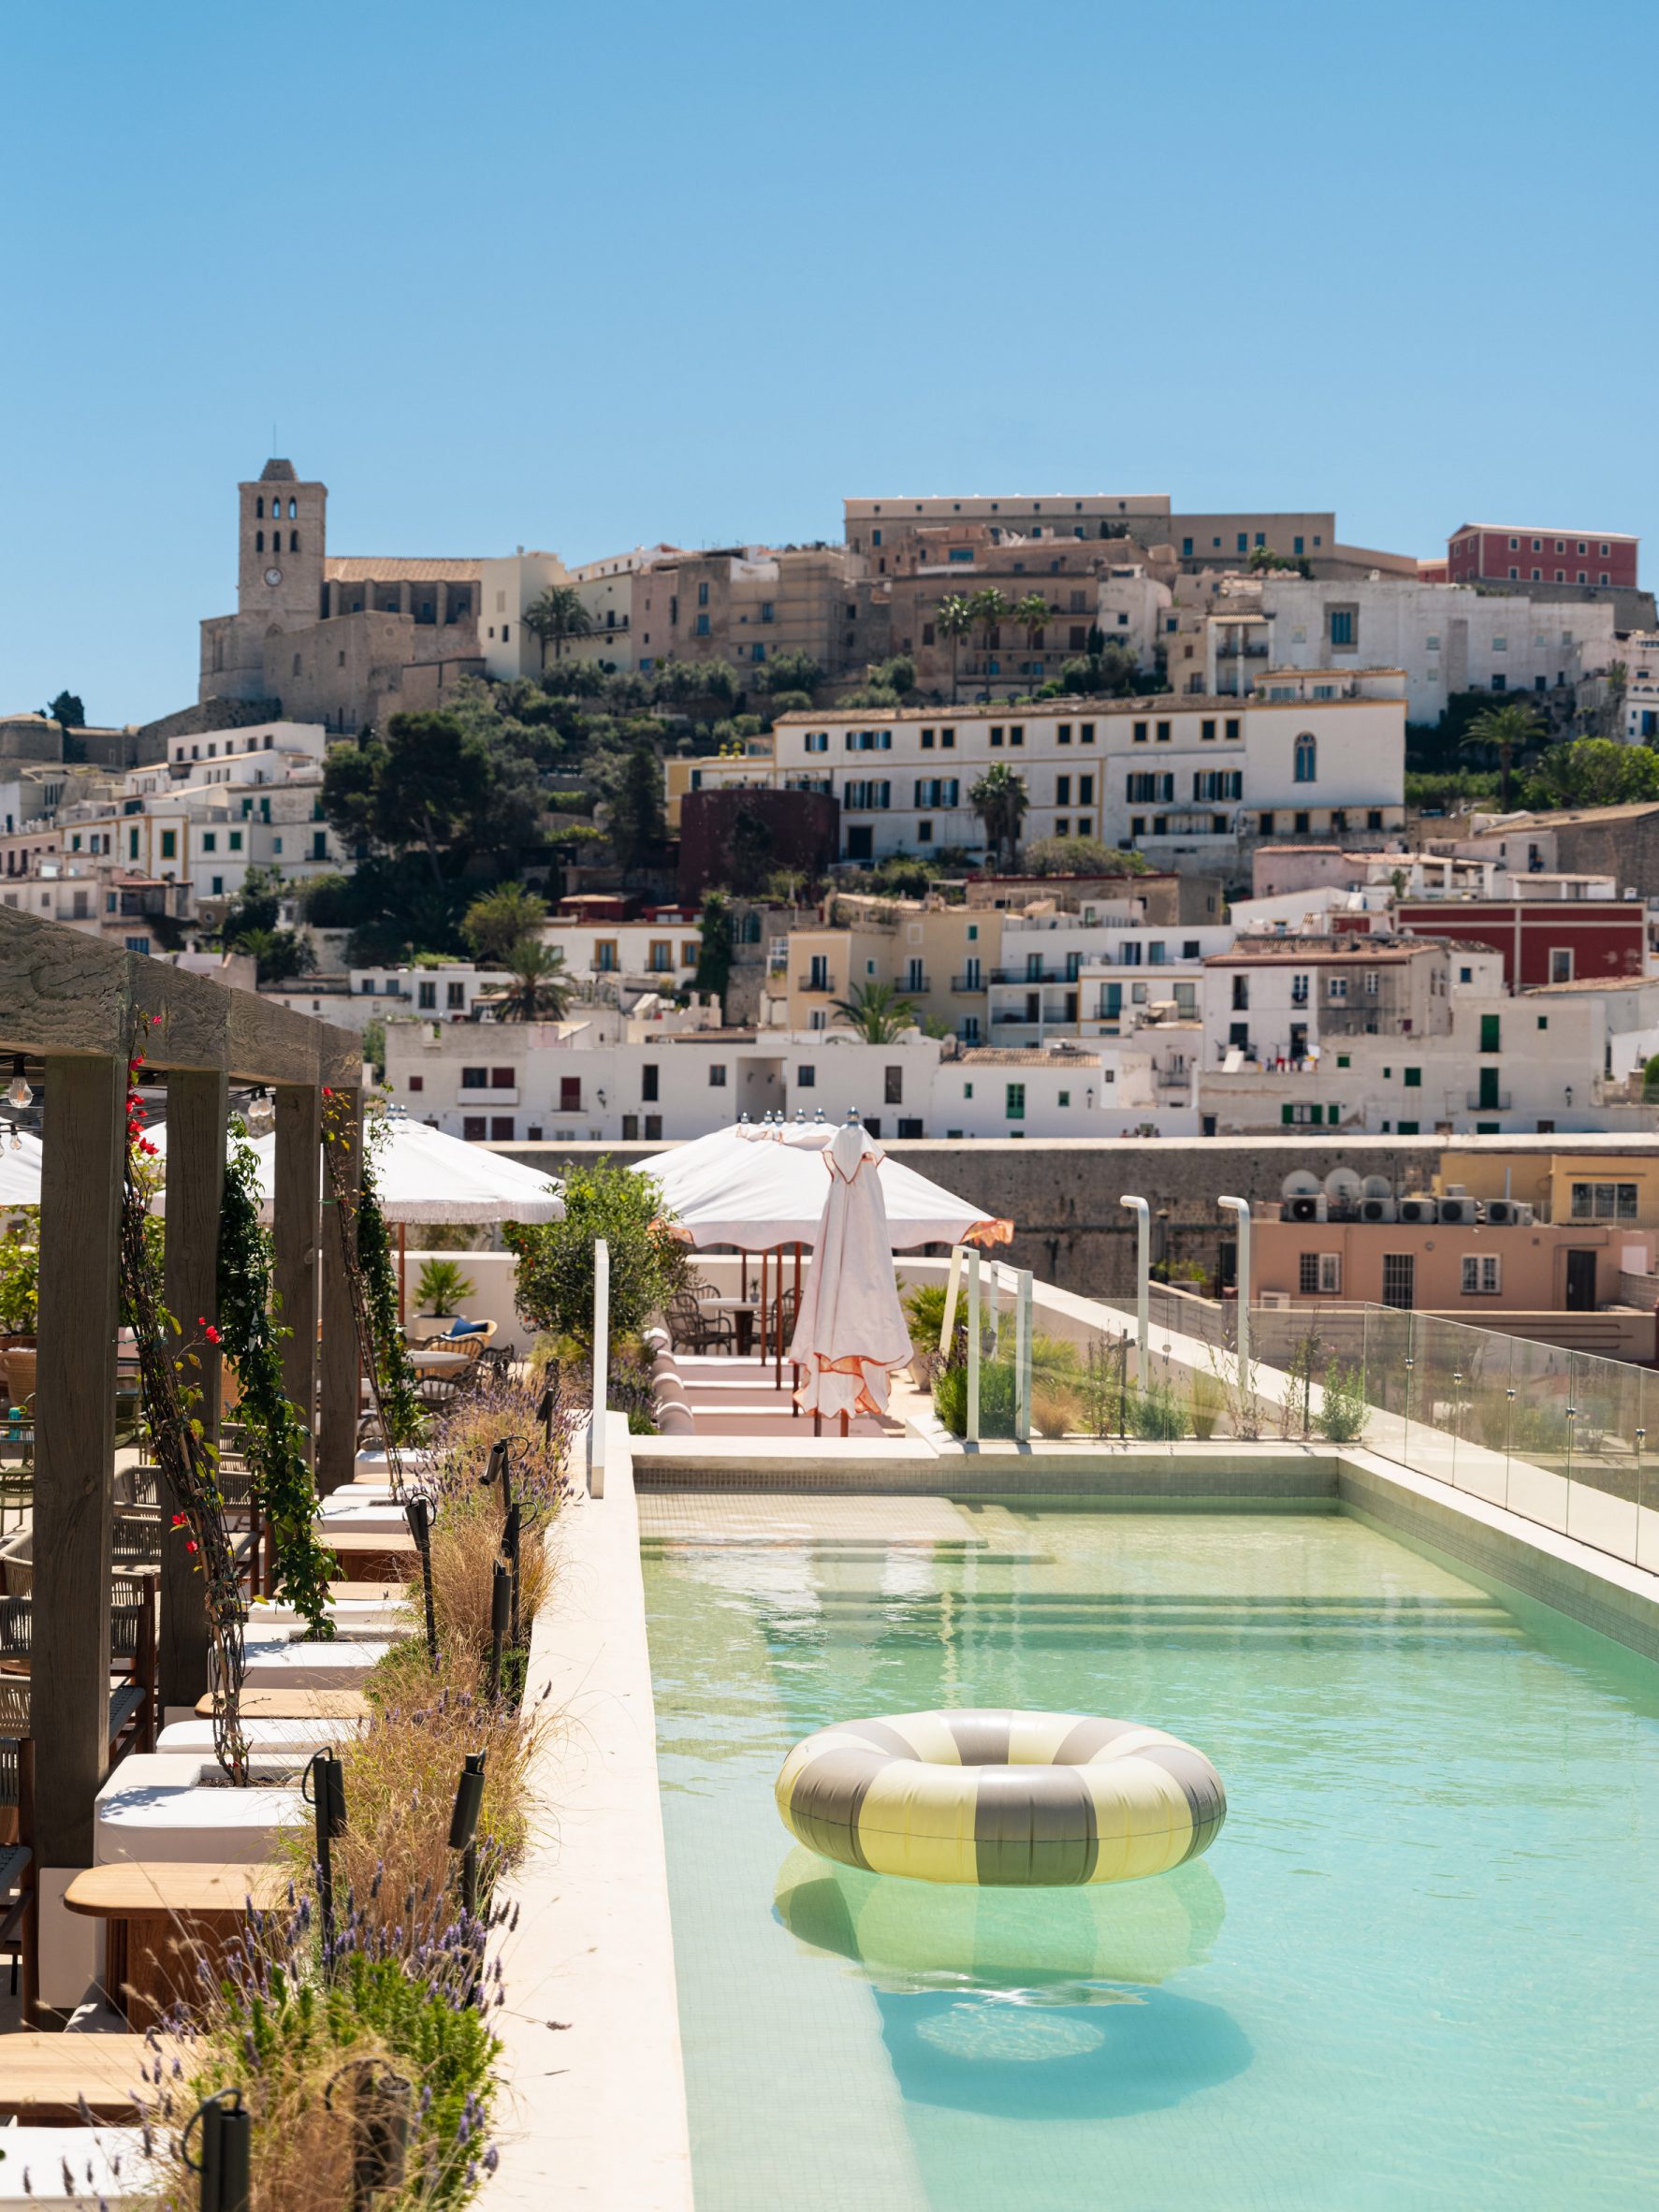 The Standard designs island hotel to reference "golden age of Ibiza"